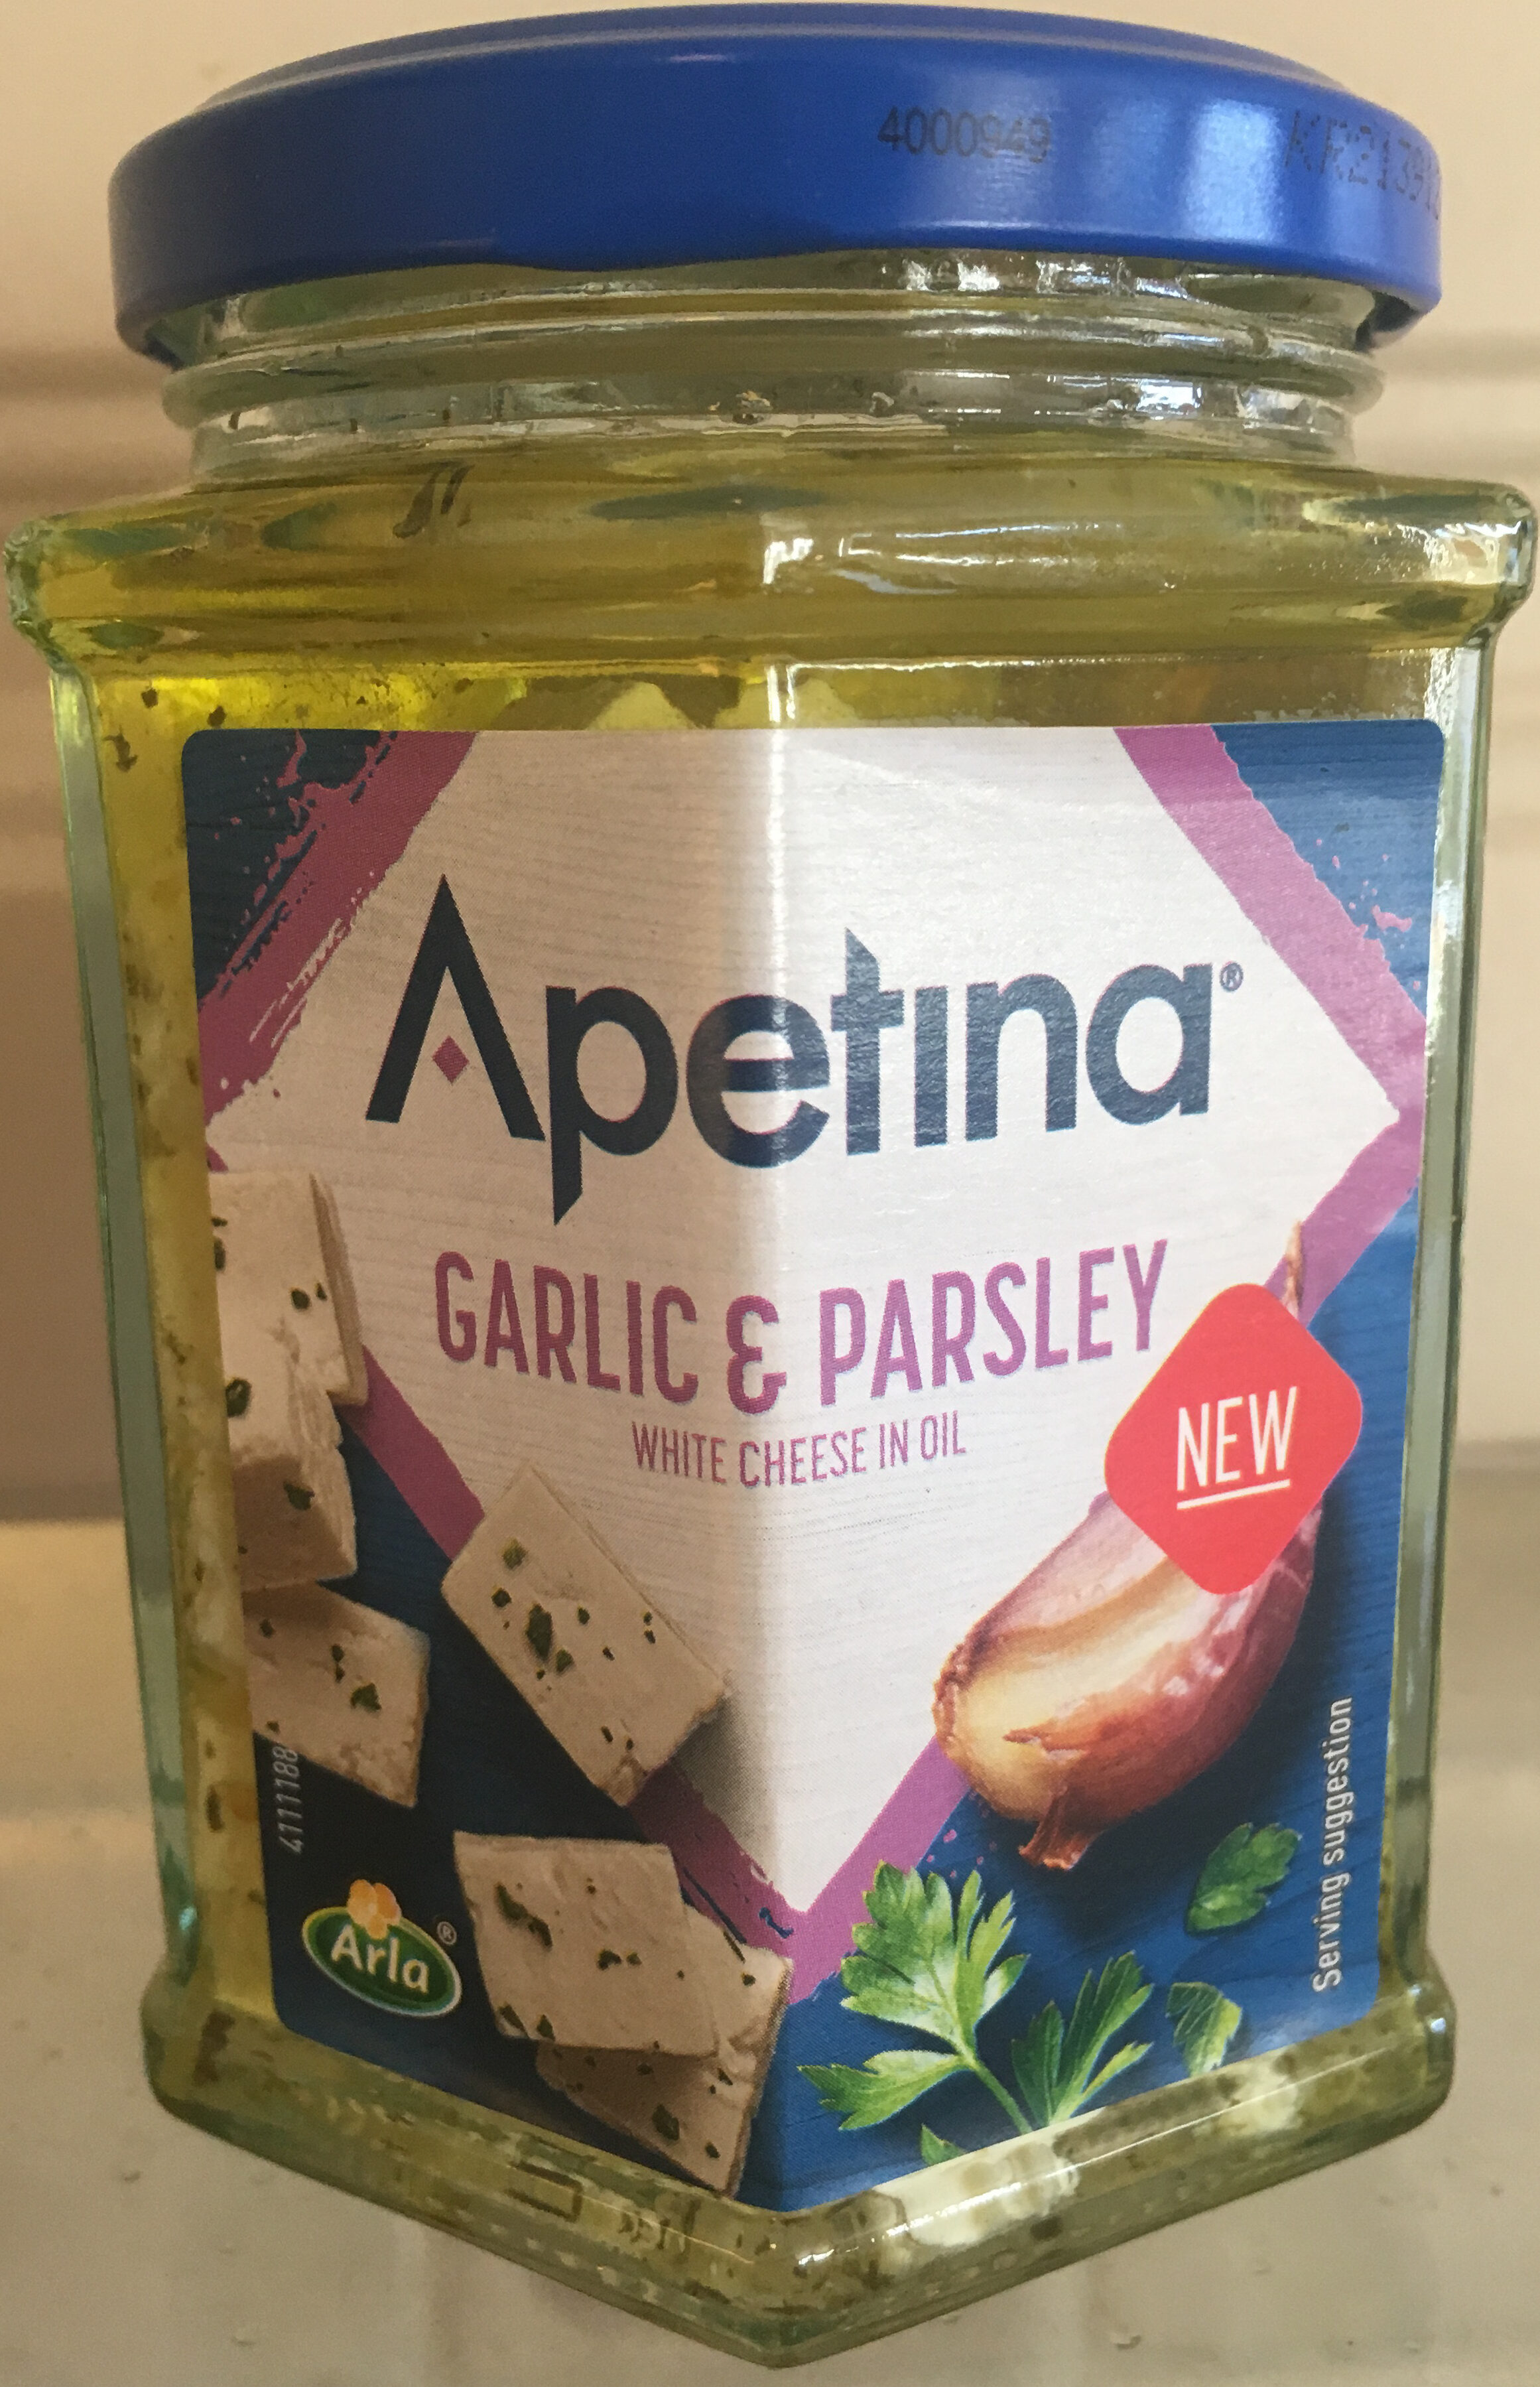 Garlic & Parsley White Cheese in Oil - Product - nb